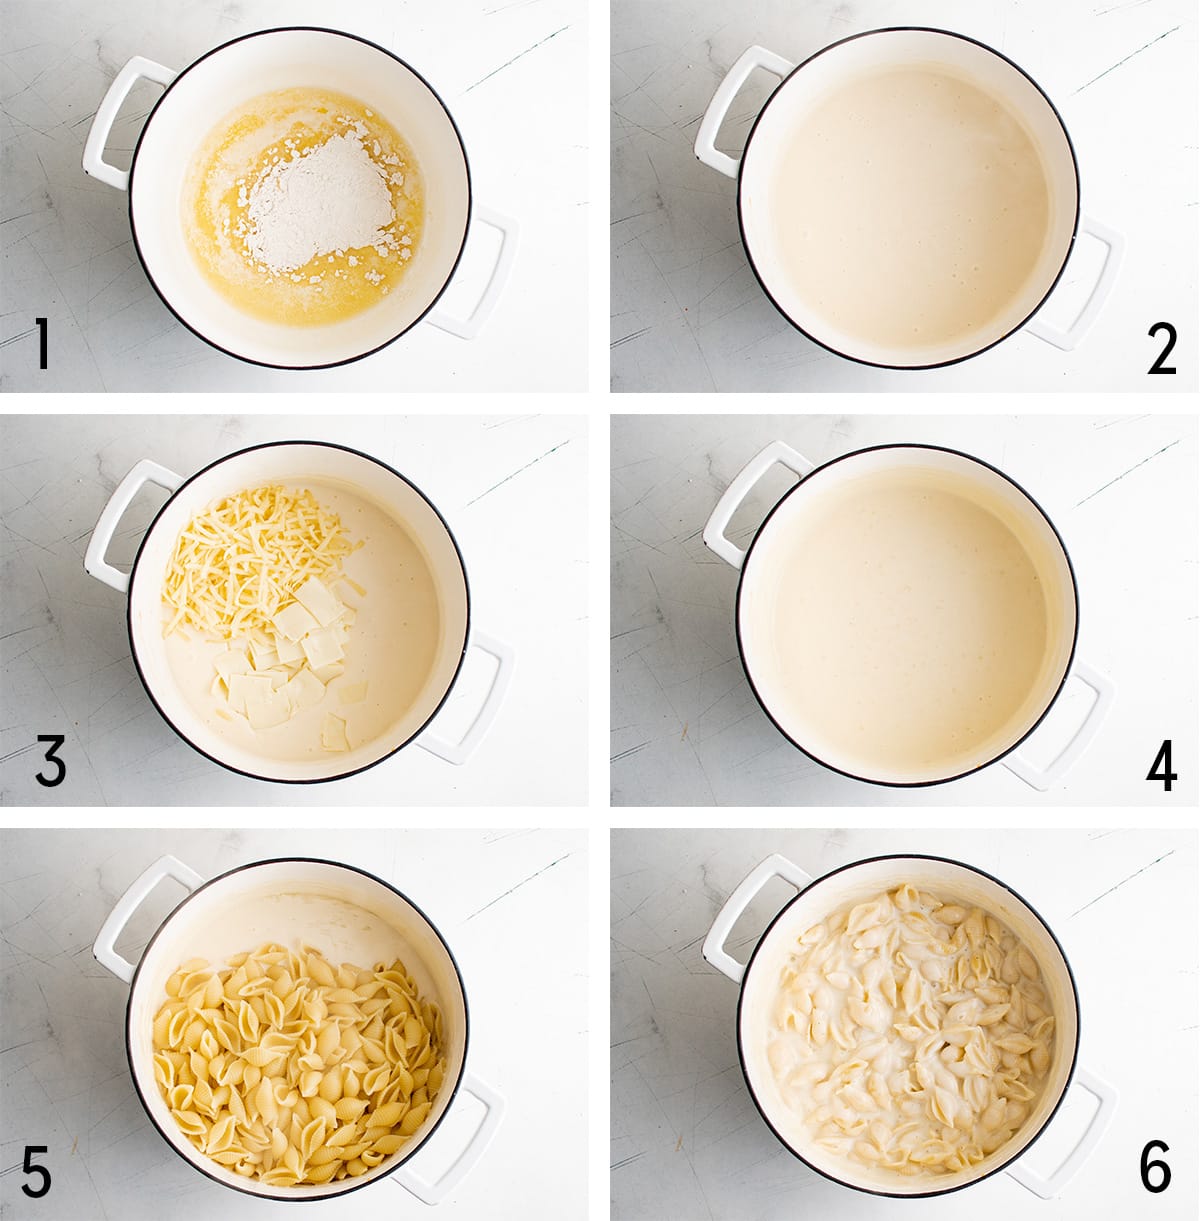 Collage of 6 images depicting the steps for making Panera mac and cheese